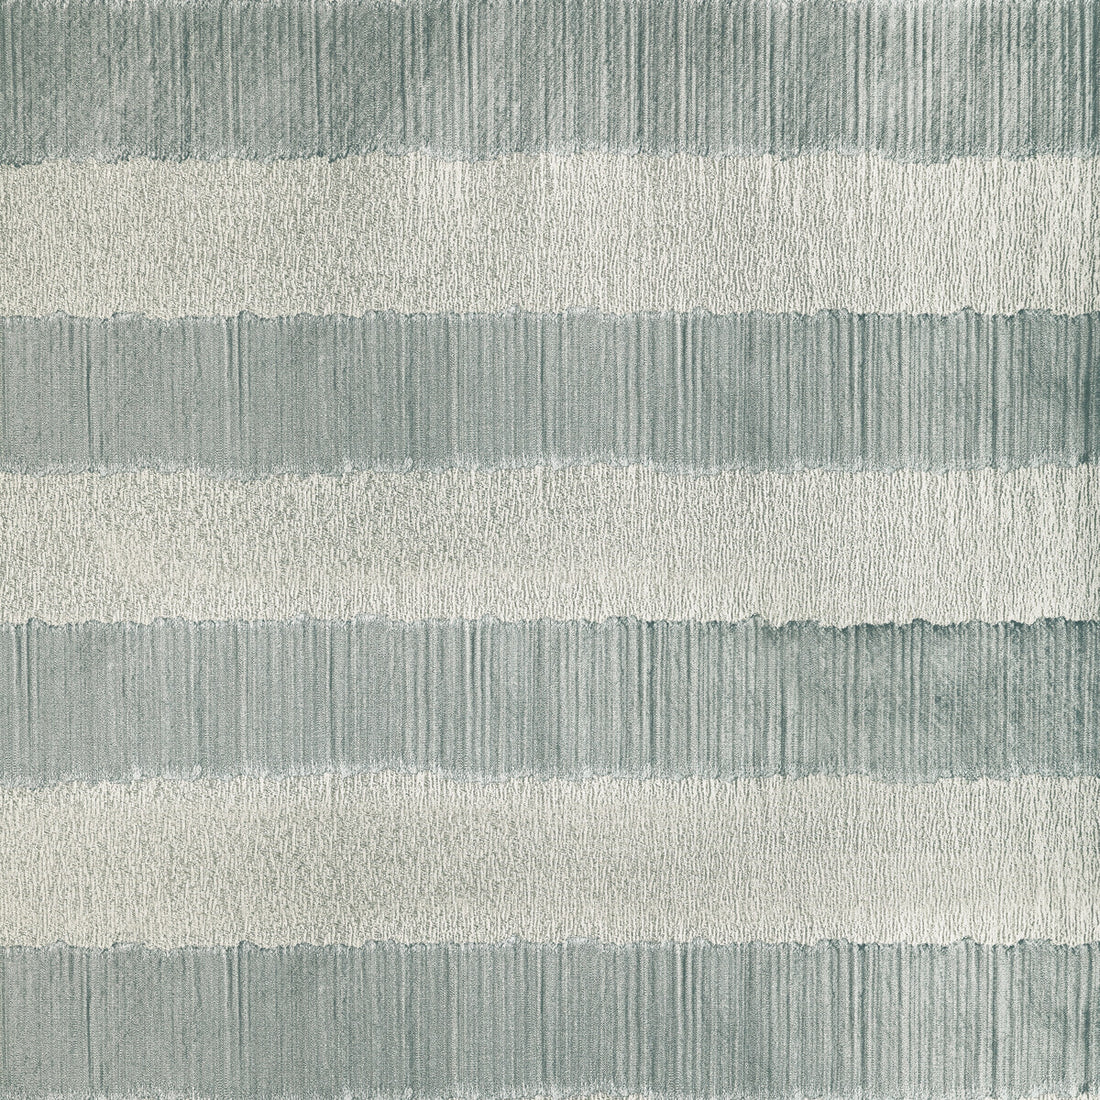 Vantage fabric in mist color - pattern 4955.13.0 - by Kravet Couture in the Modern Luxe Silk Luster collection